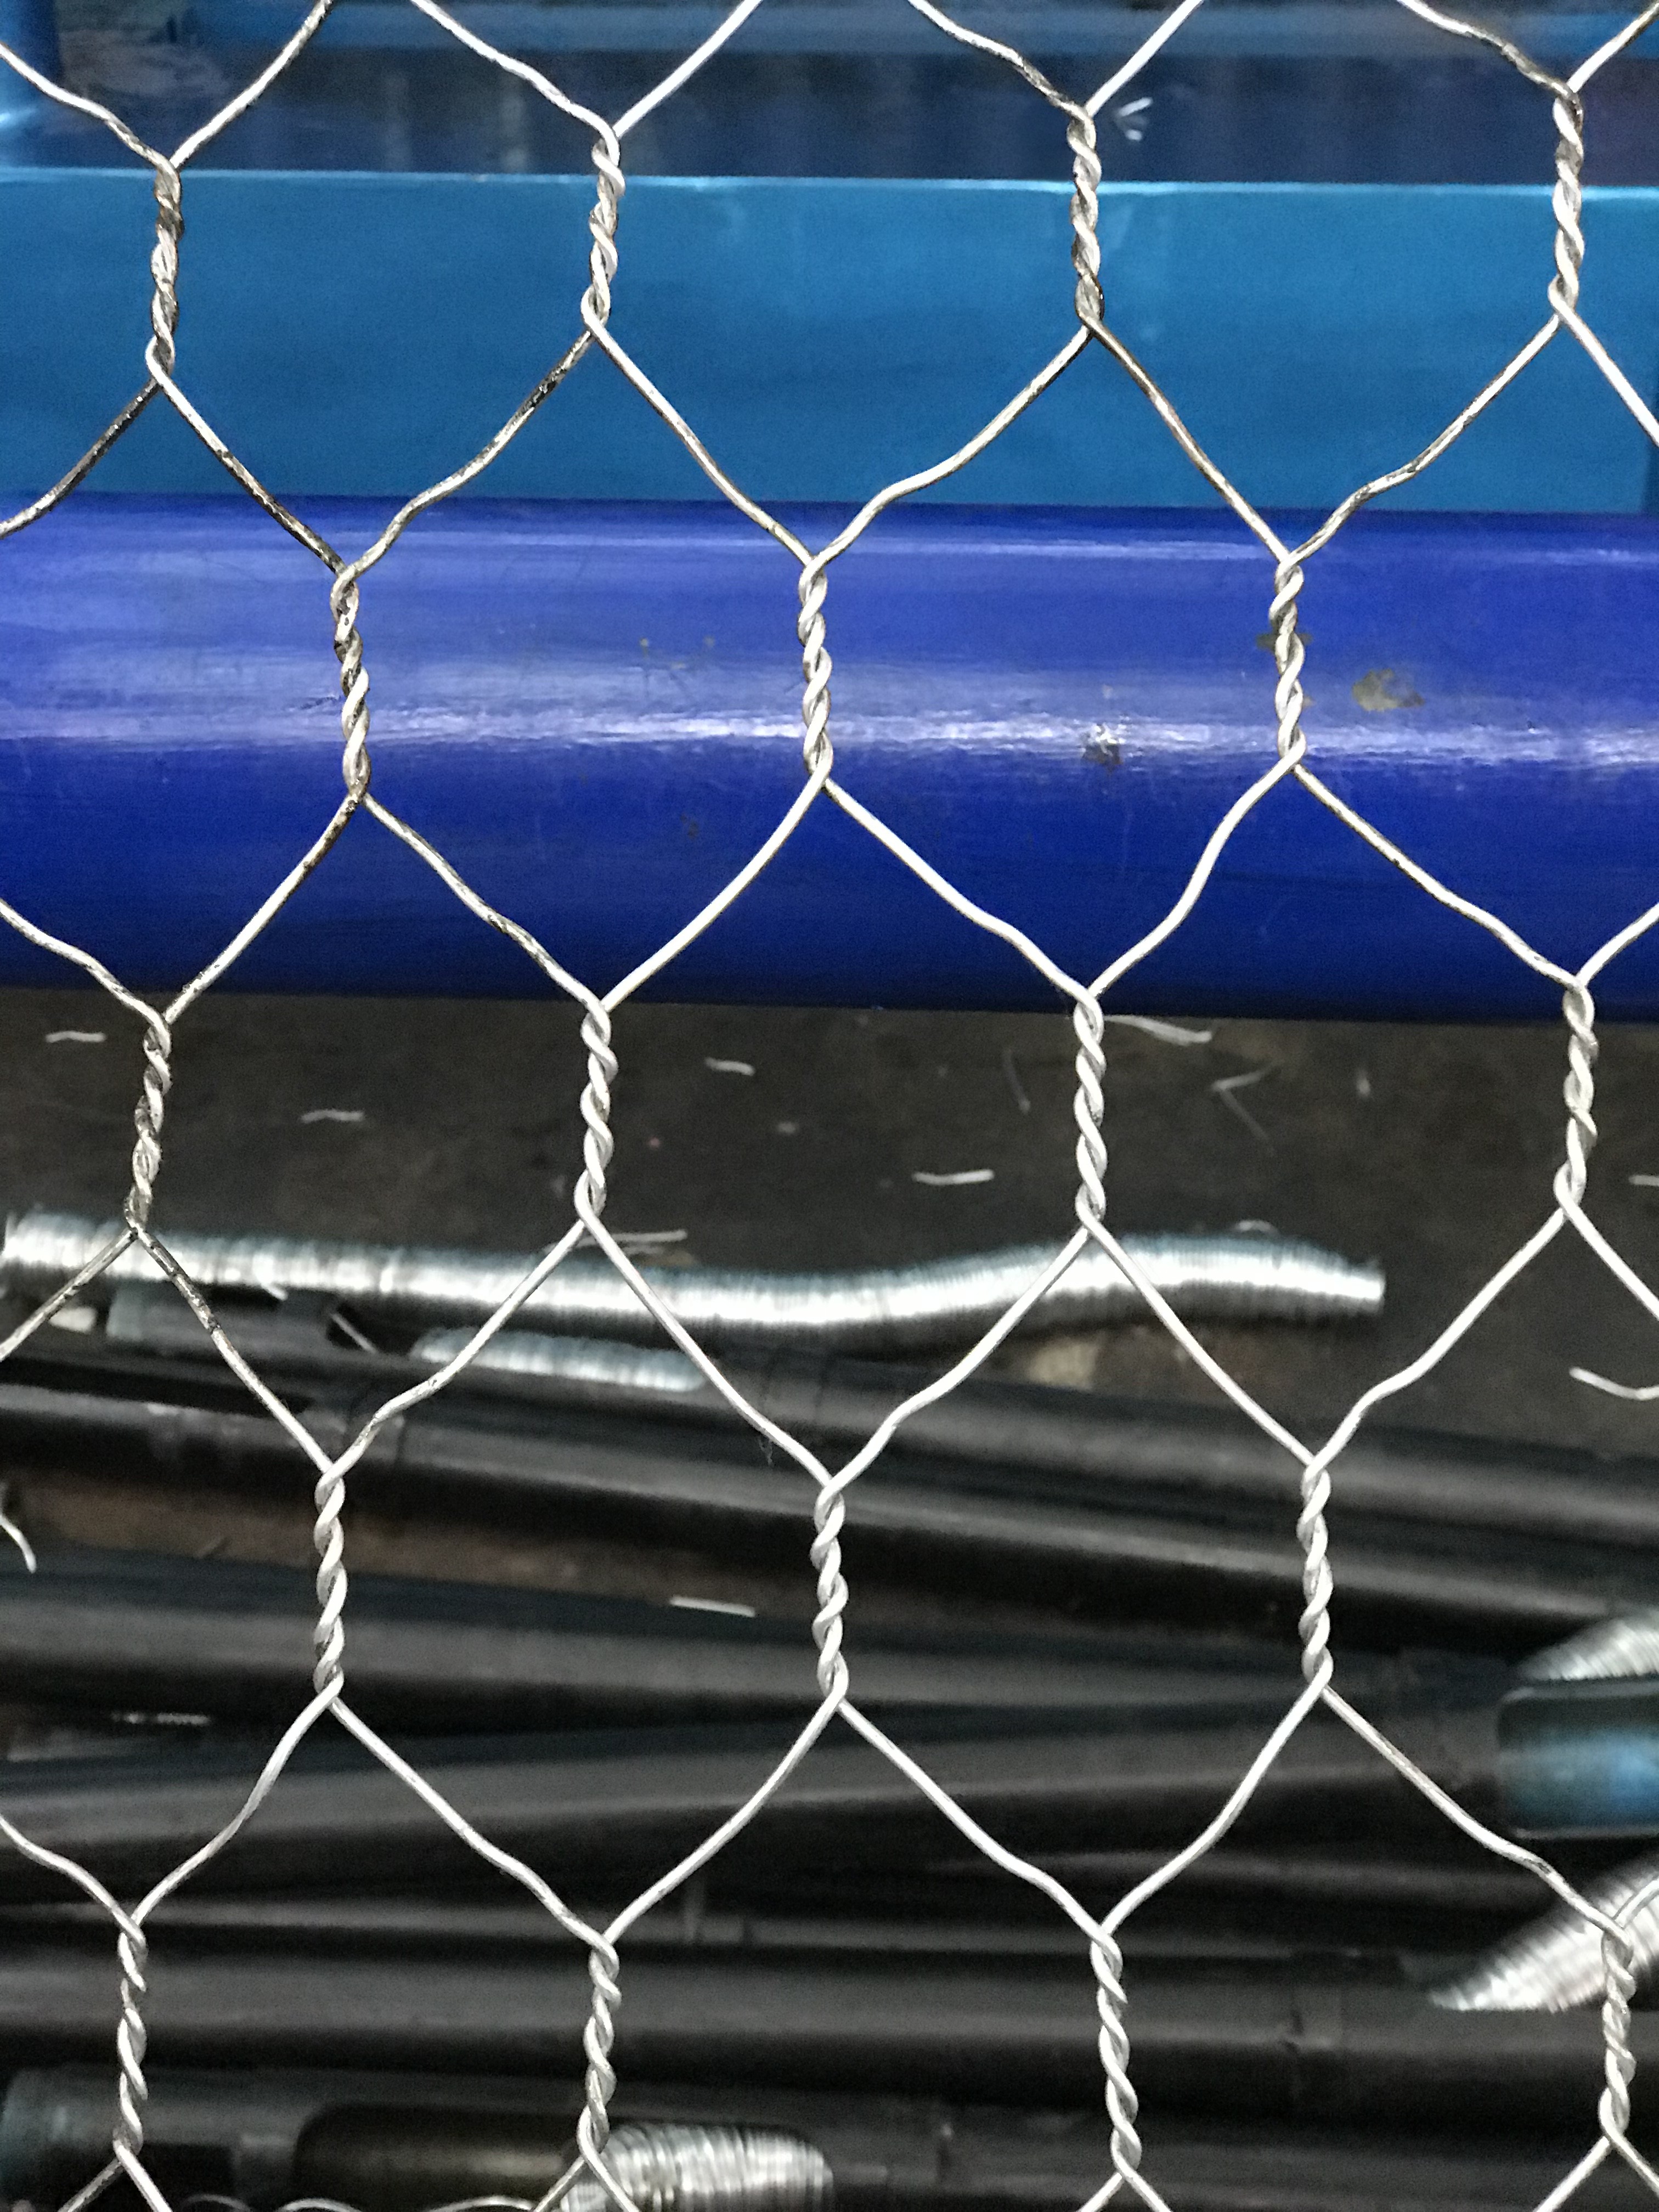 What is the tensile strength of gabion mesh?